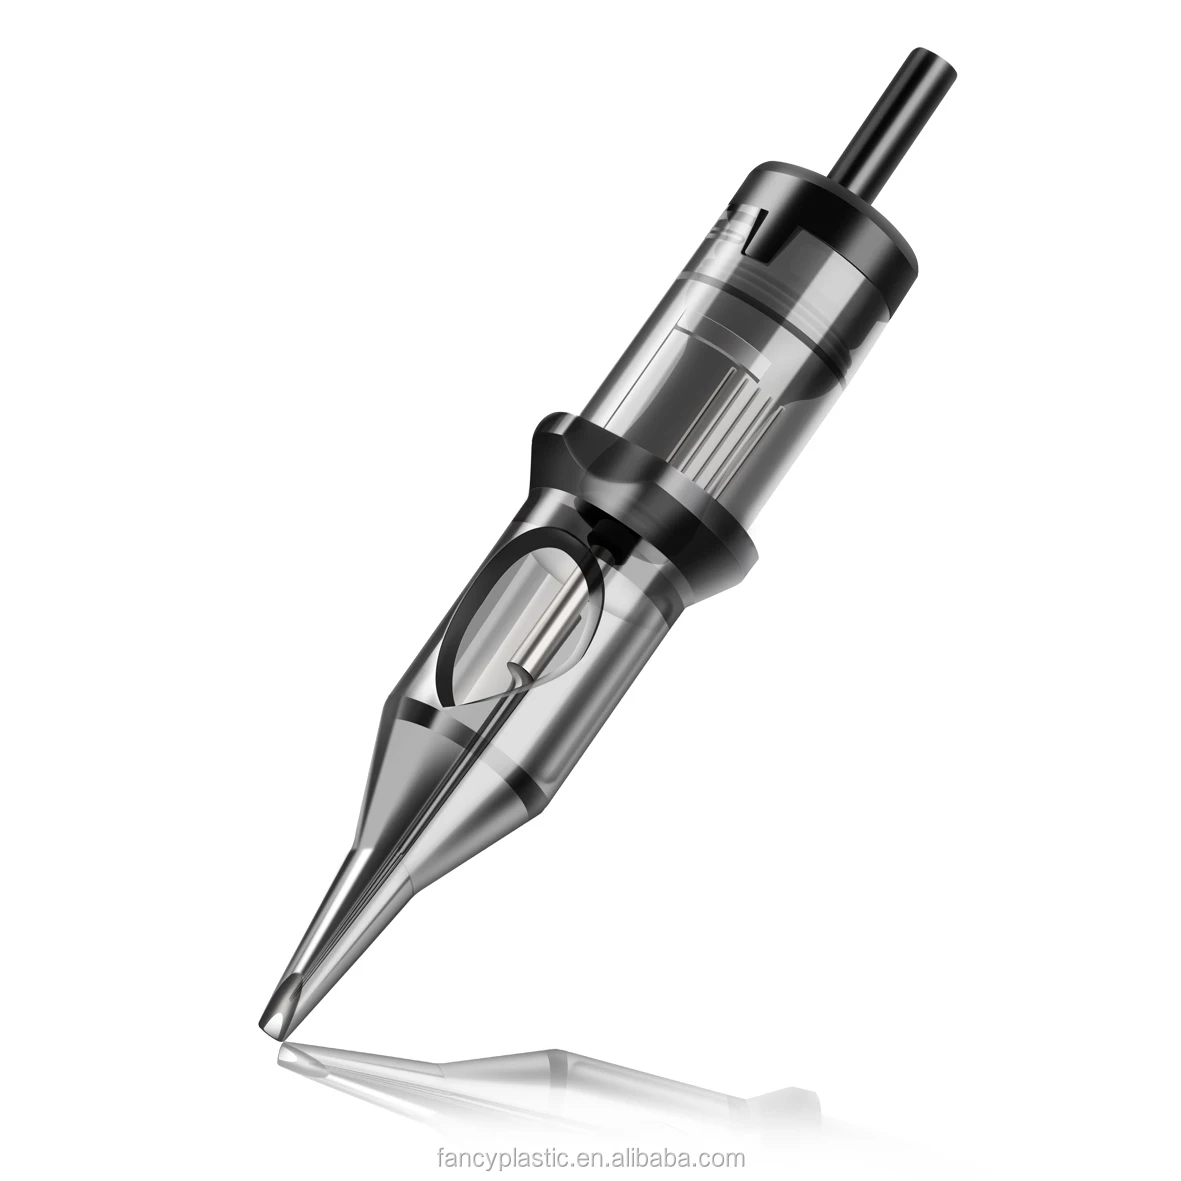 
High quality round liner 7 tattoo needle cartridge for tattoo  (60729663484)